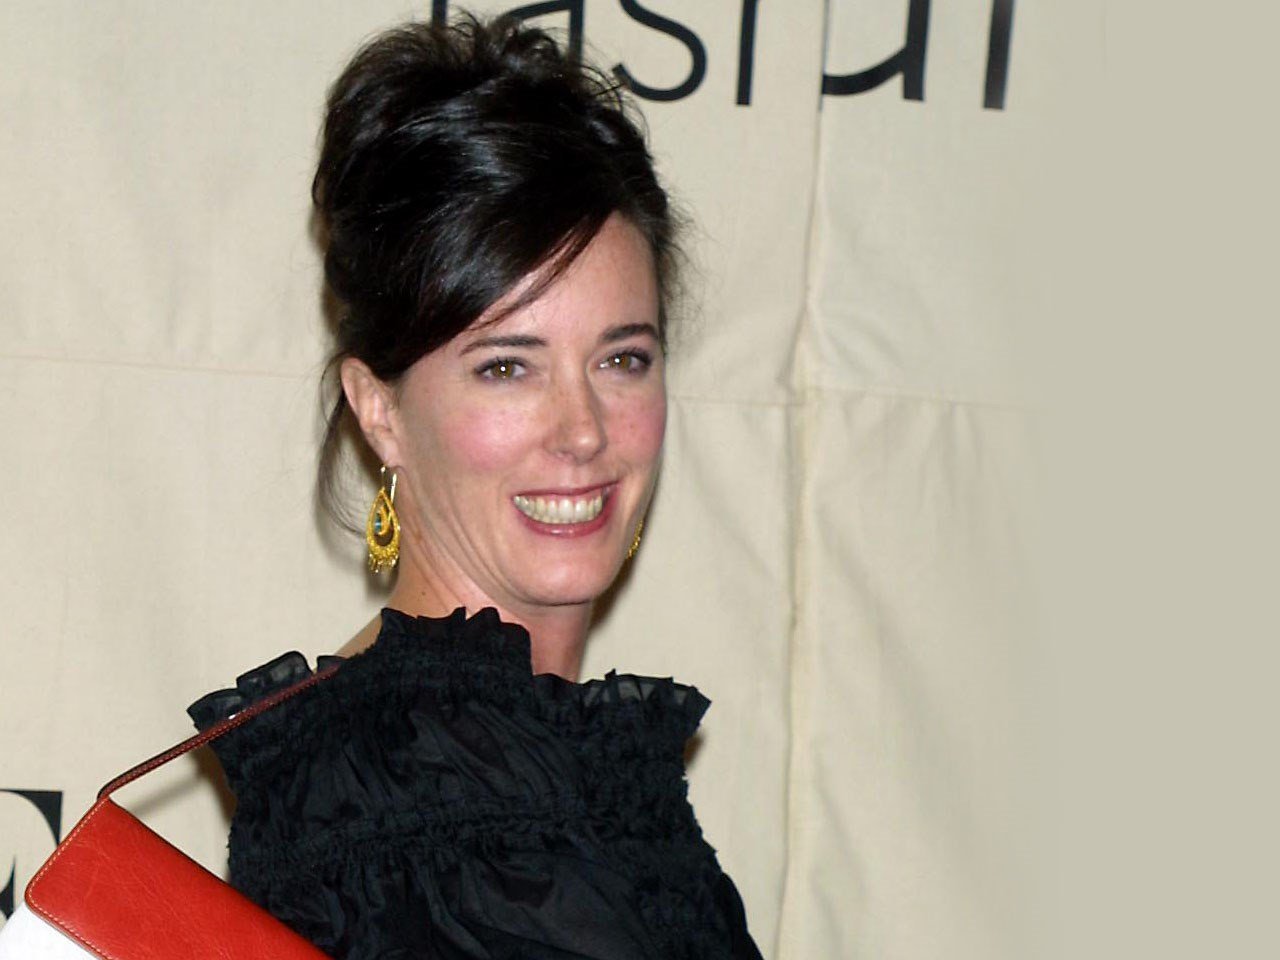 Kate Spade Foundation to donate $1M for suicide prevention - WWAYTV3